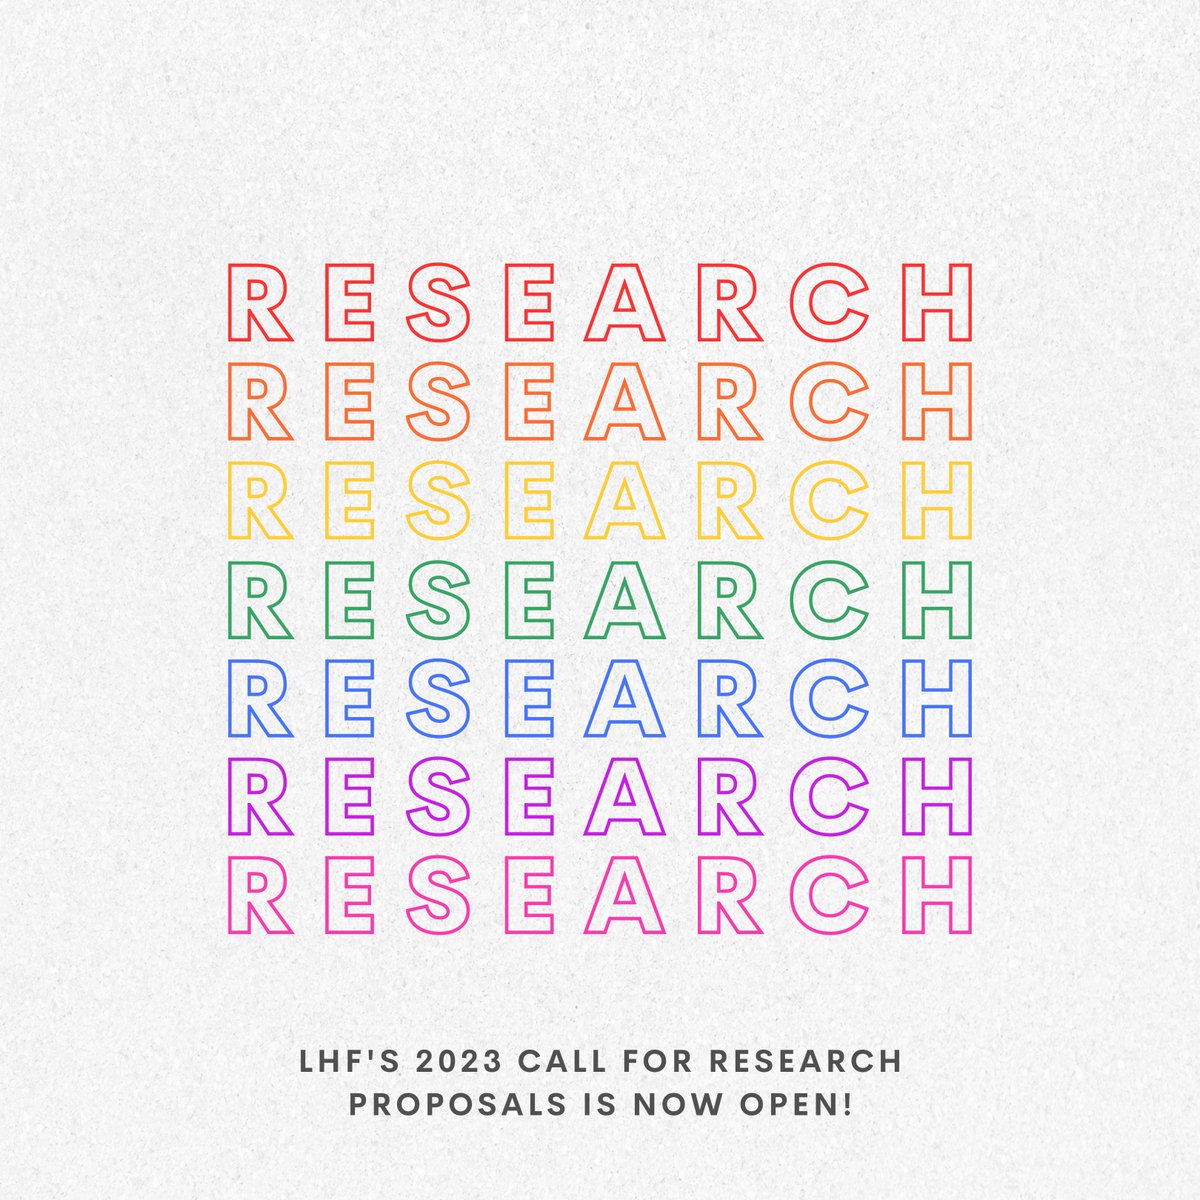 The Lesbian Health Fund (LHF), a program of @GLMA_LGBTHealth, has launched the call for applications! For the 2023 grant cycle, LHF plans to fund grants in the range of $5,000-$10,000. Deadline for applications is February 28, 2023. Apply here: bit.ly/3g4VYrr